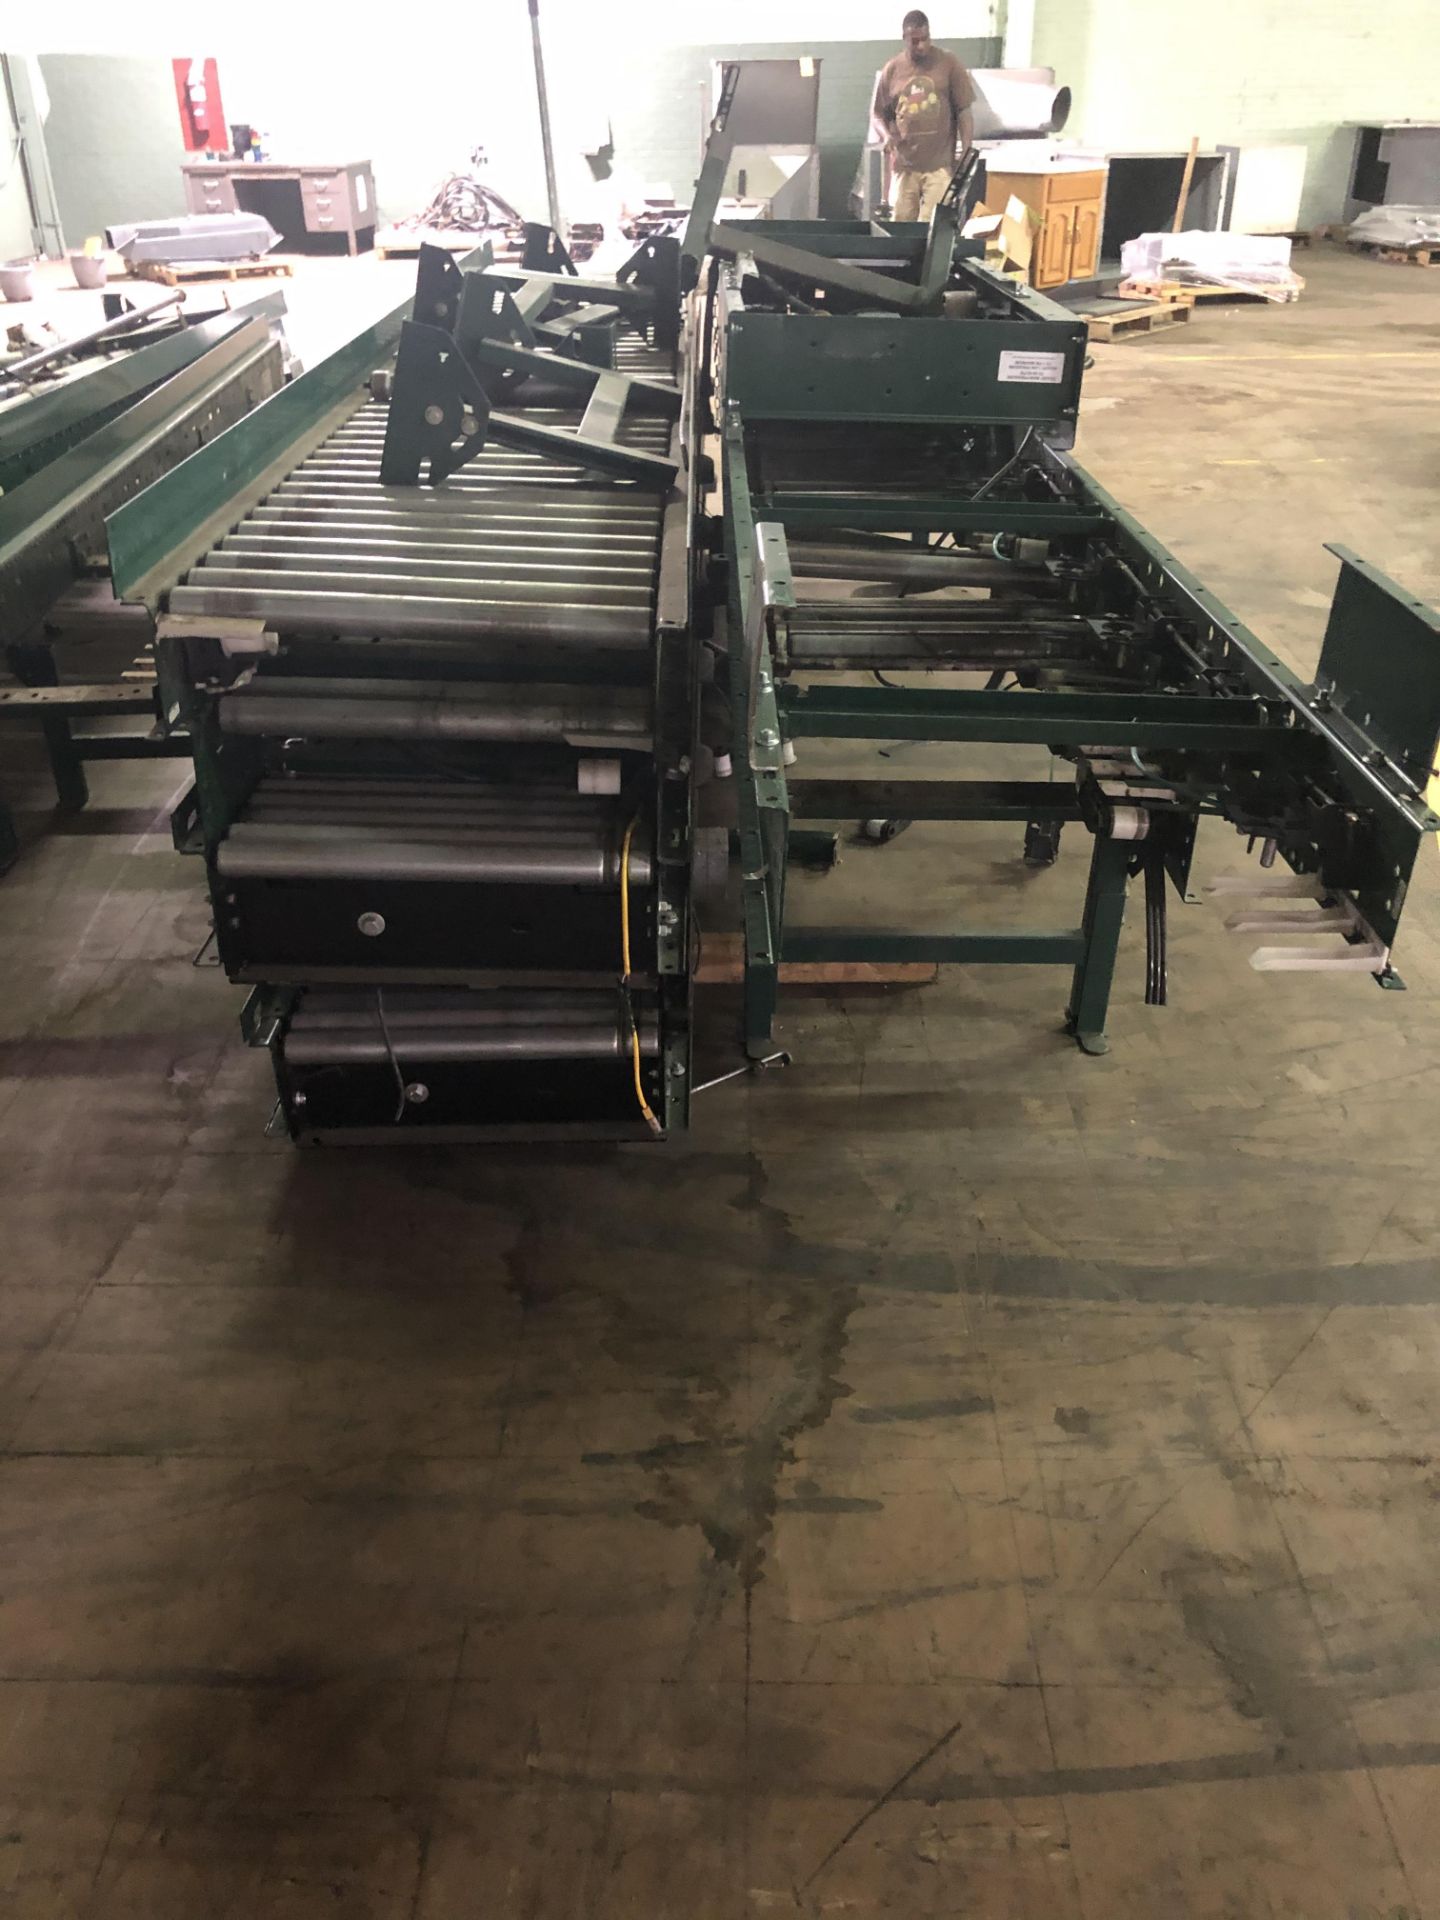 Siemens Dematic Motorized Roller Conveyor, Approximate (7) 10' Sections, RIGGING FEE - $800 - Image 2 of 3